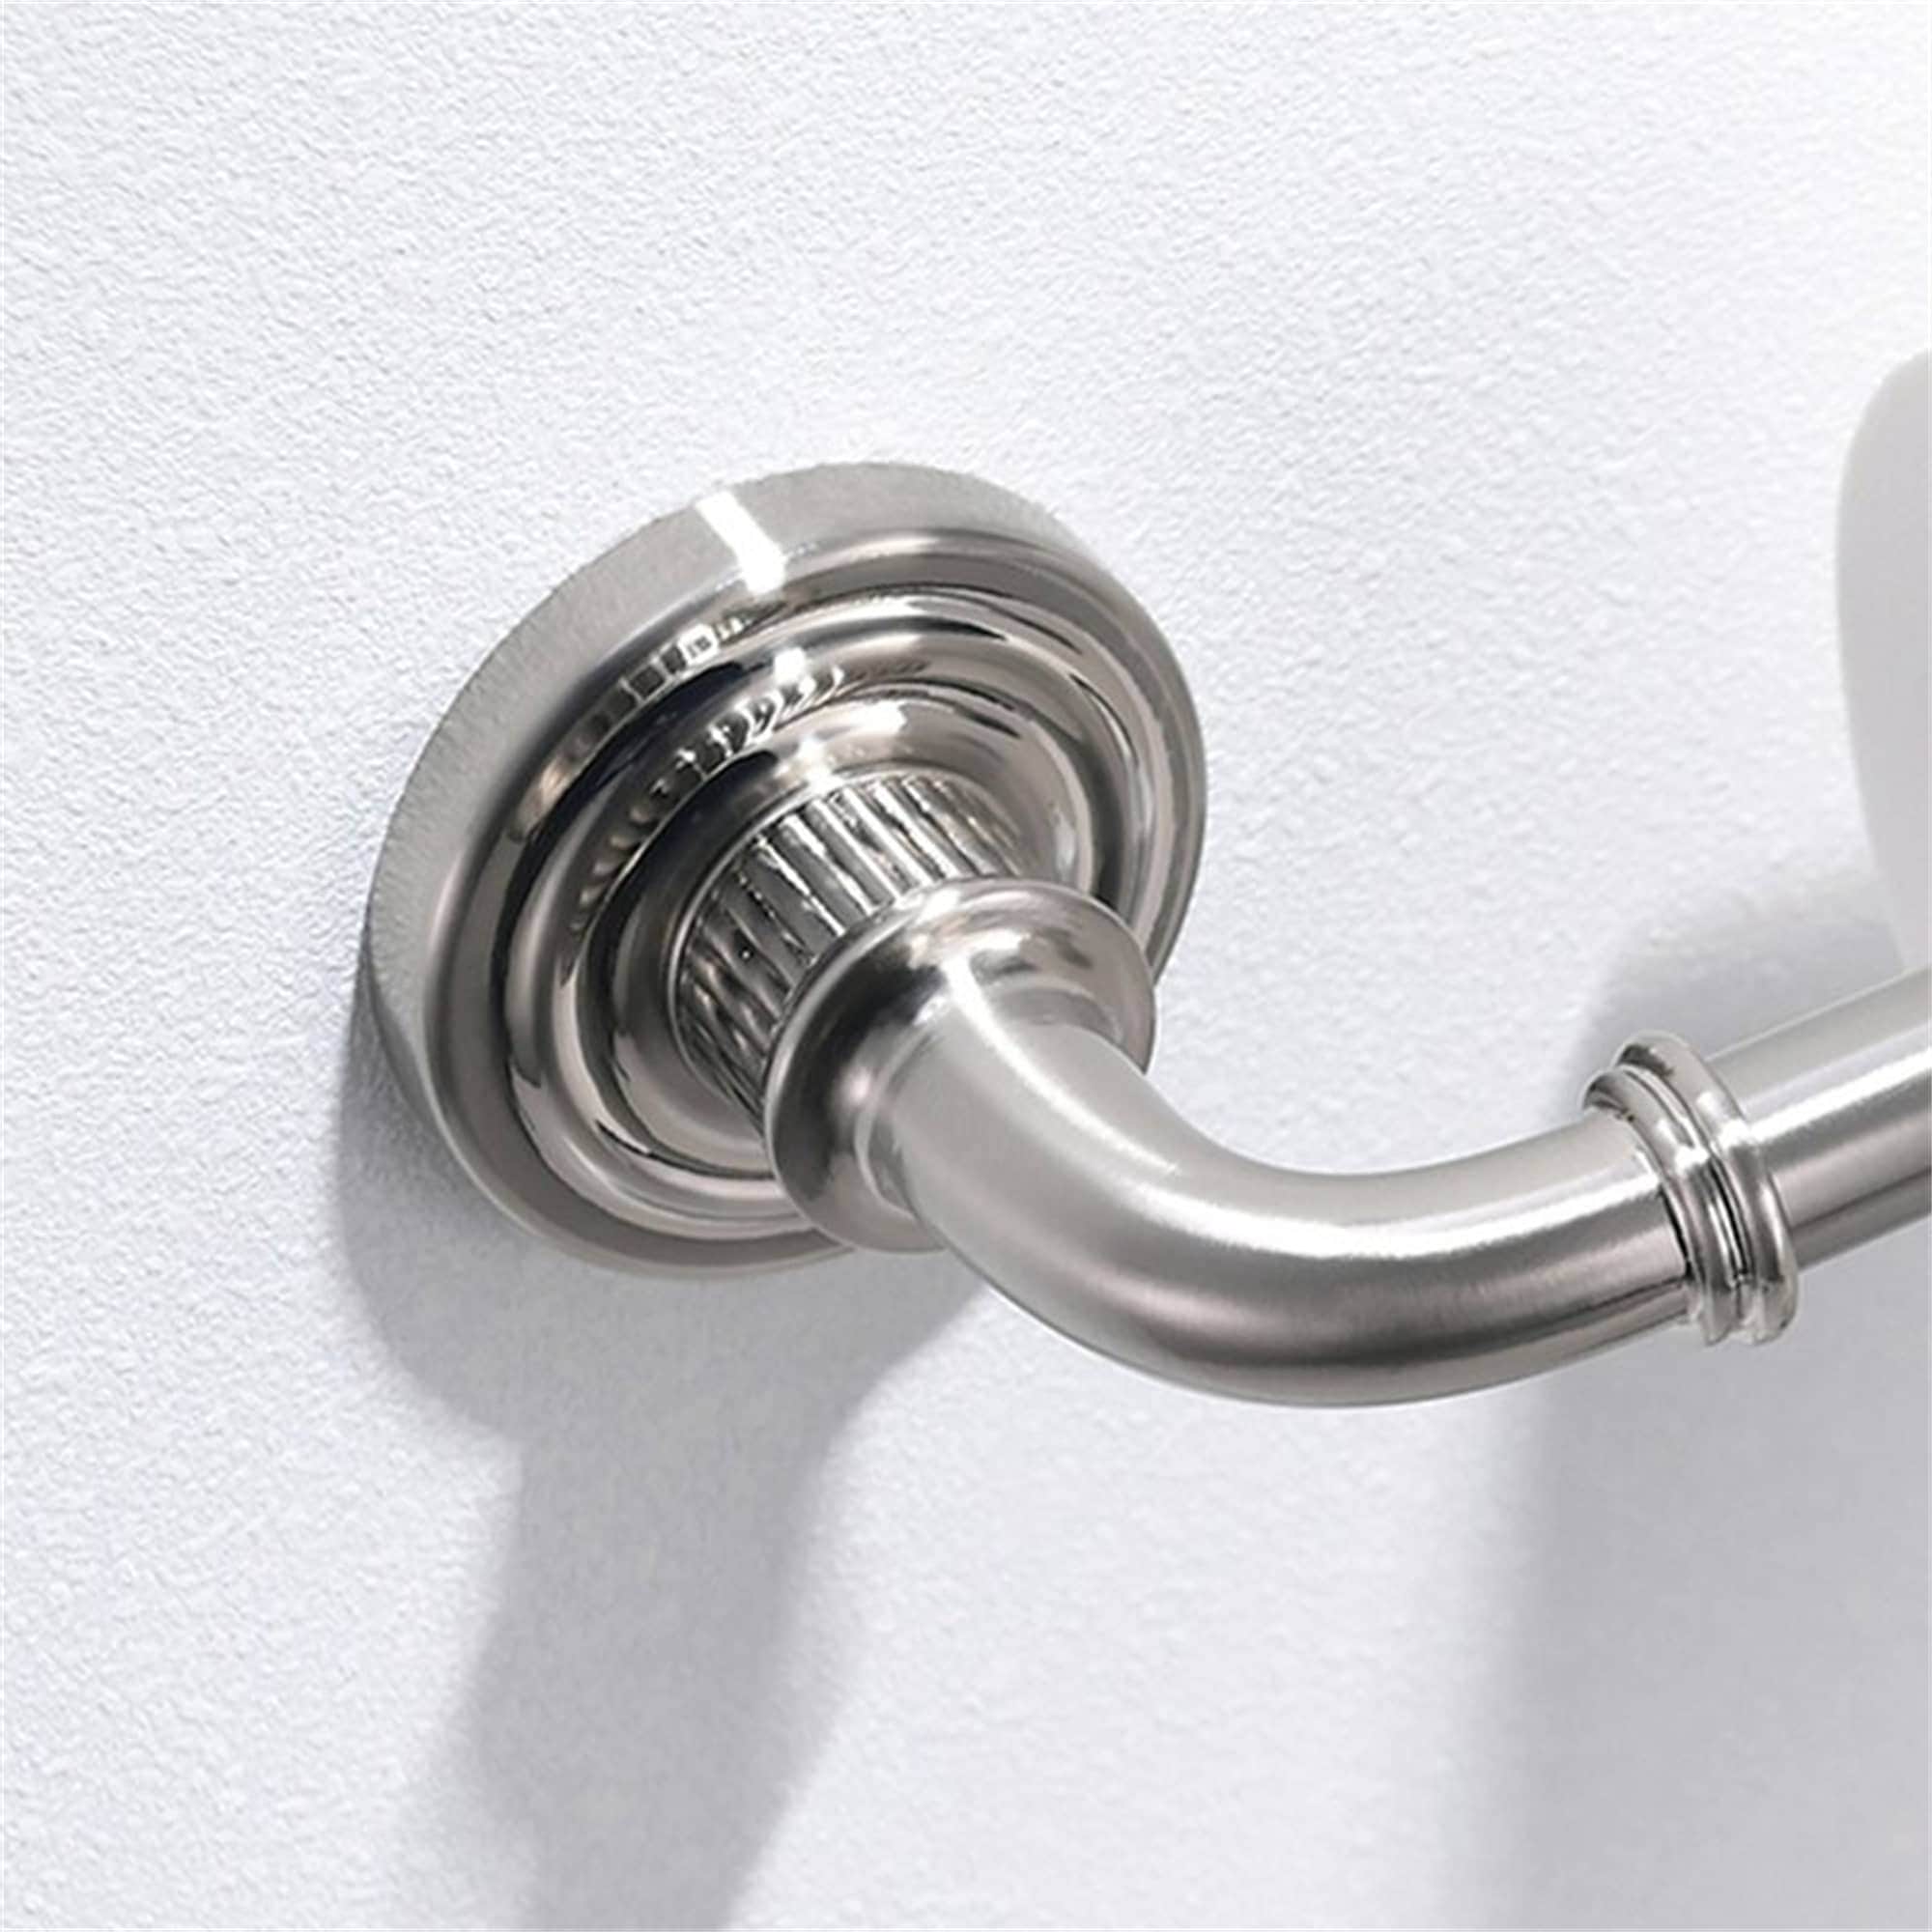 https://ak1.ostkcdn.com/images/products/is/images/direct/ae88f3683214a1650417c4896251c8a118ad8be8/5-Piece-Bathroom-Hardware-Set-Towel-Bar-Toilet-Paper-Holder-Robe-Hooks-Stainless-Steel-Wall-Mounted-Adjustable-Accessory-Set.jpg